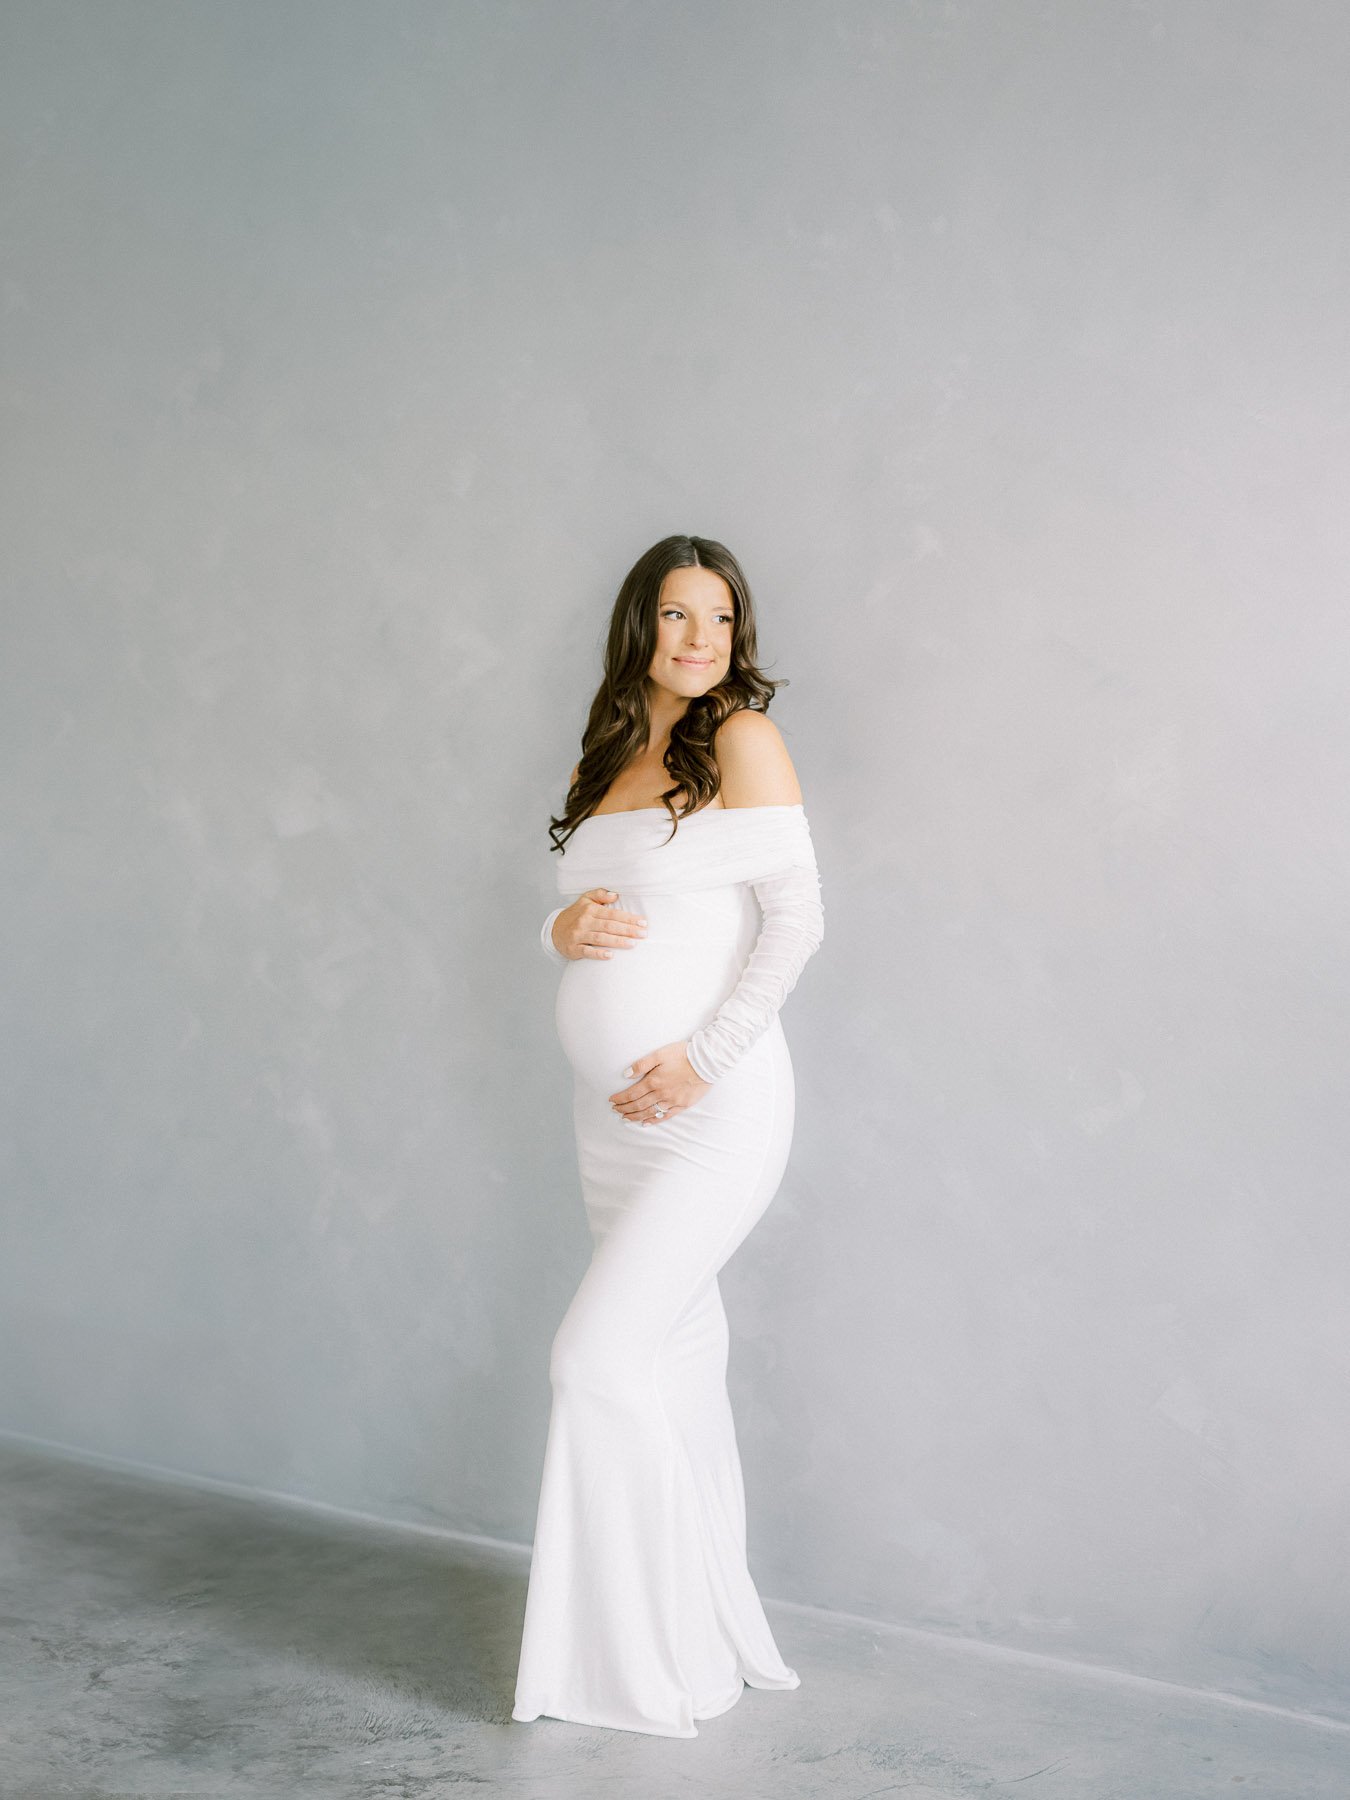 Simeone Maternity by Michelle Lange Photography-9.jpg